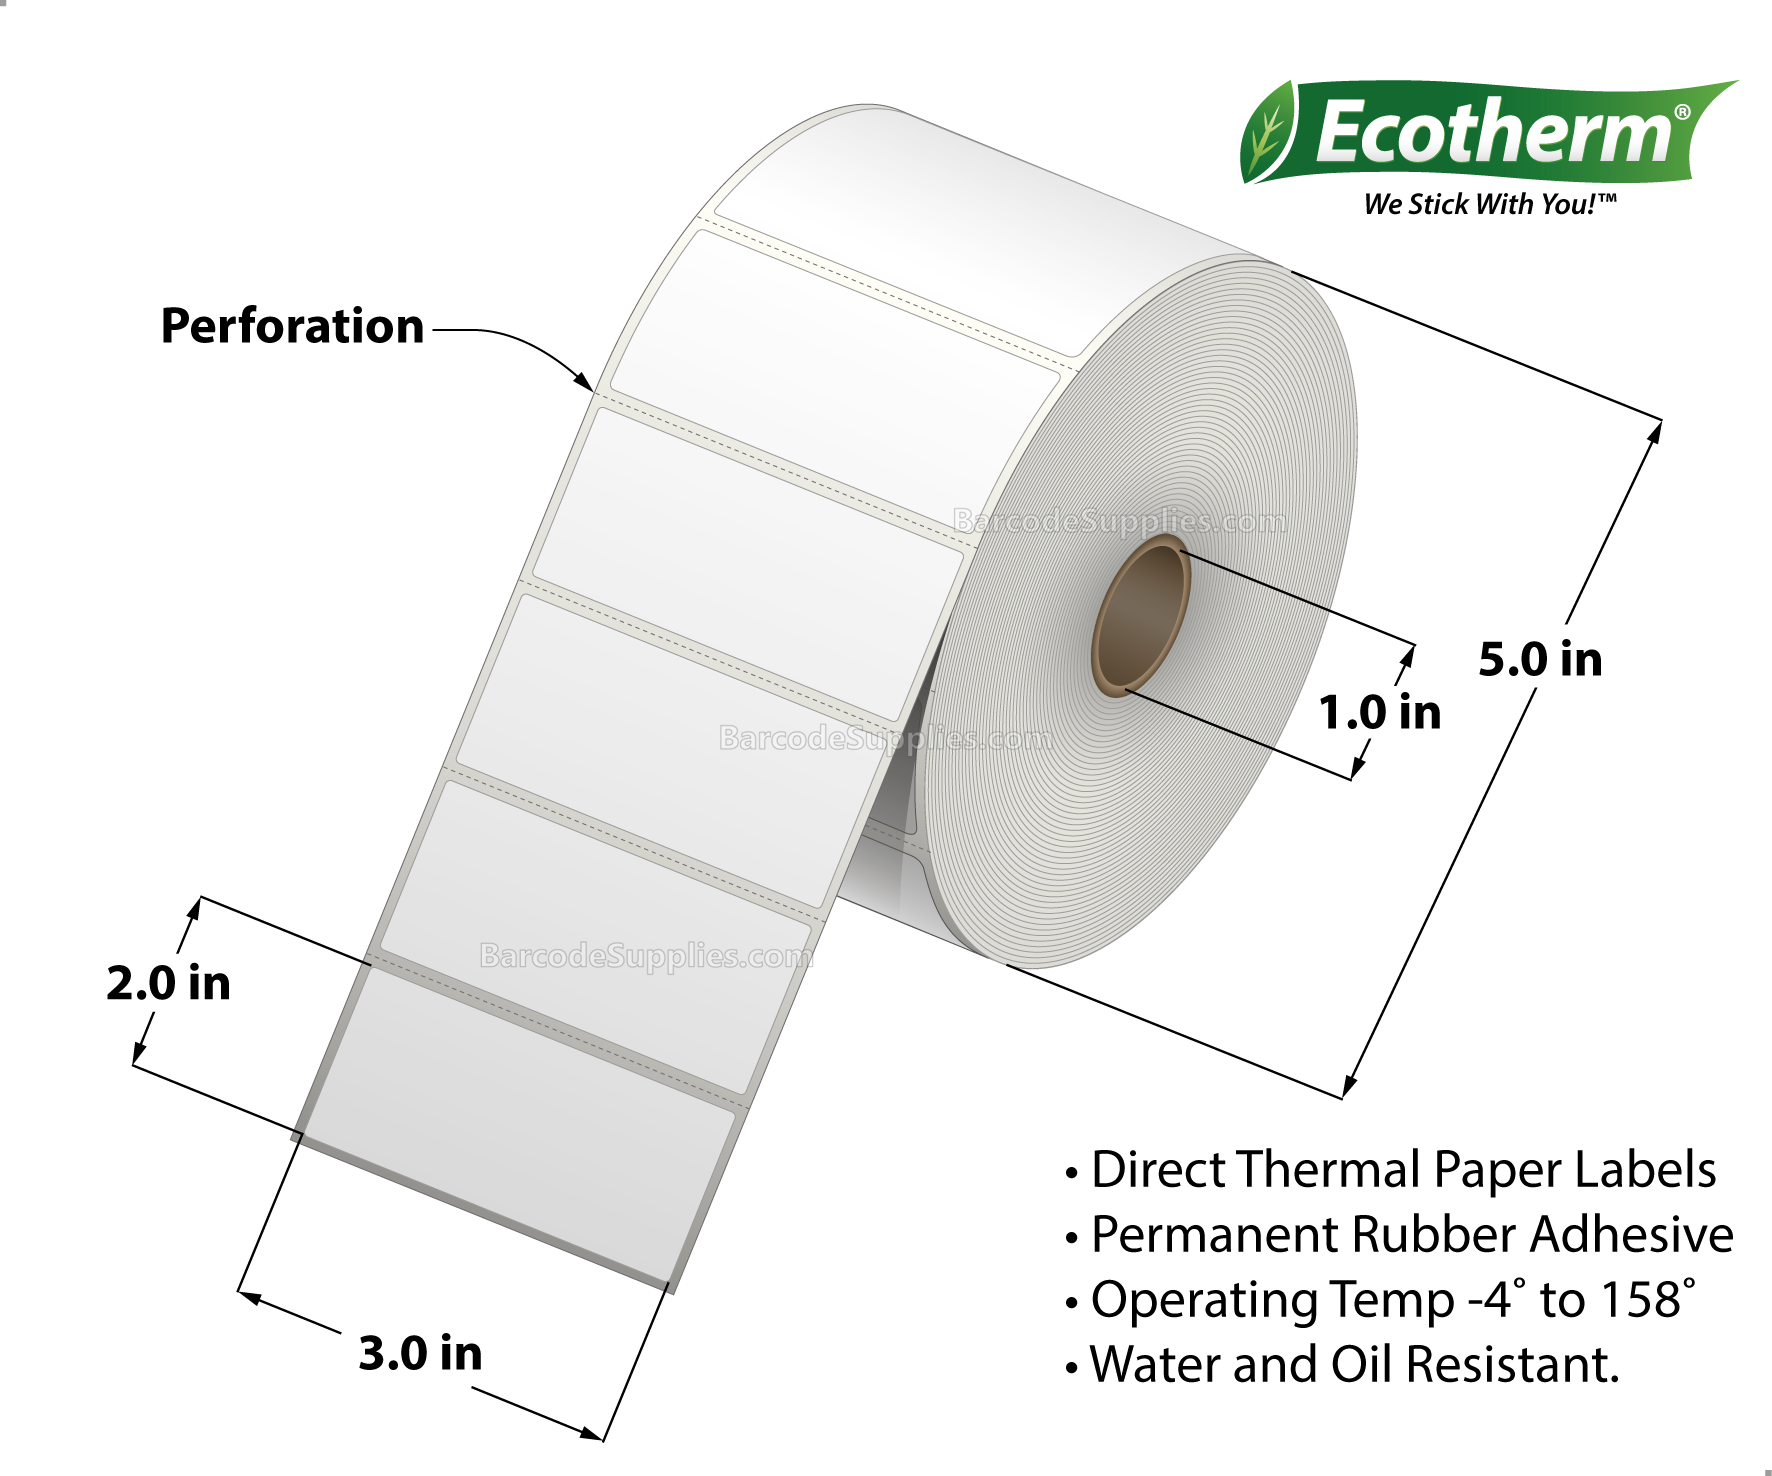 3 x 2 Direct Thermal White Labels With Rubber Adhesive - Perforated - 1240 Labels Per Roll - Carton Of 6 Rolls - 7440 Labels Total - MPN: ECOTHERM15139-6